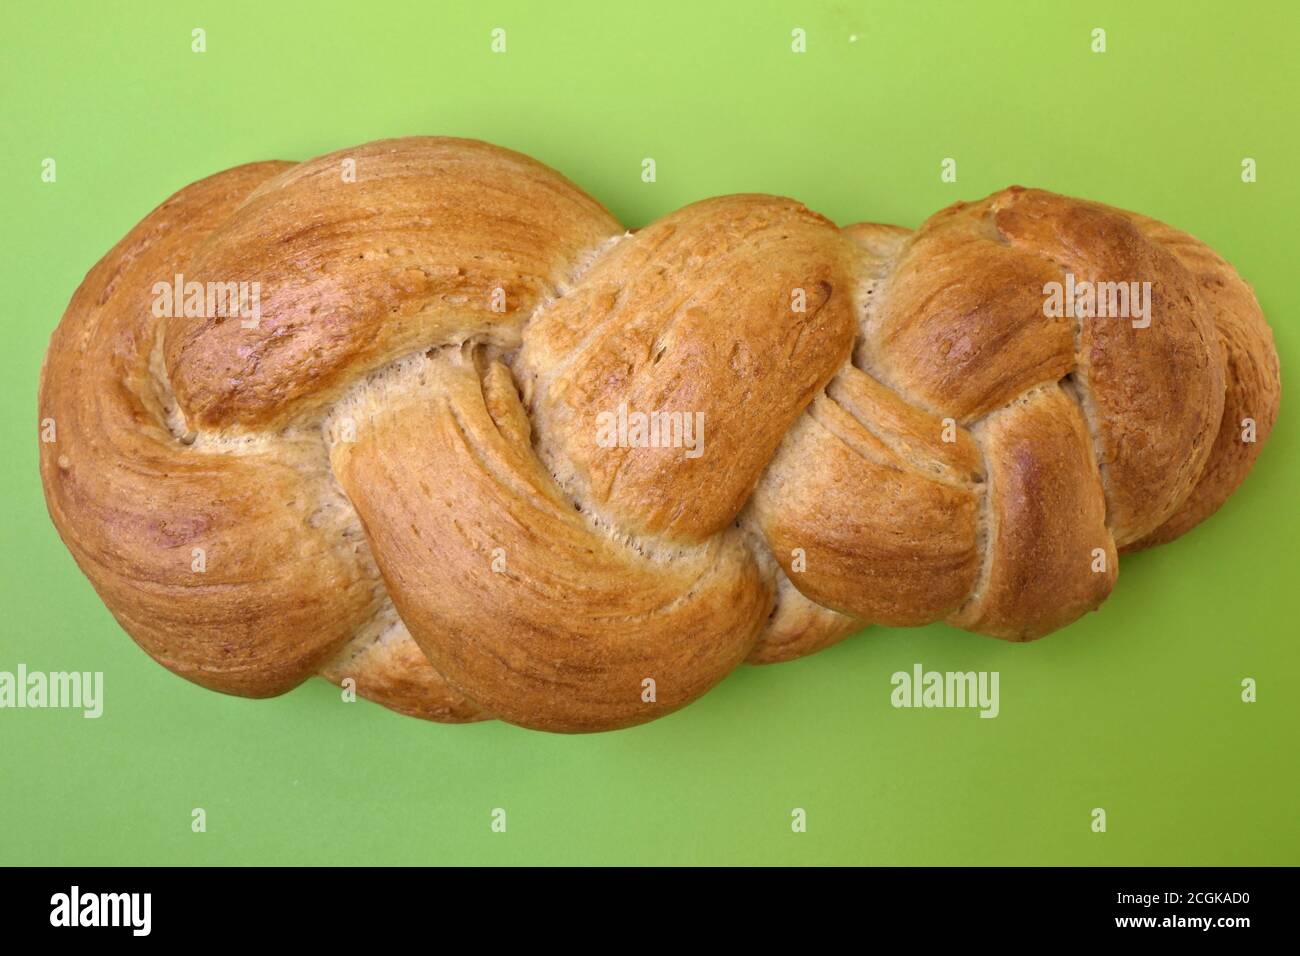 Closeup fresh homemade braid or plaited bread from above on a green carving board ready for a sunday morning breakfast Stock Photo